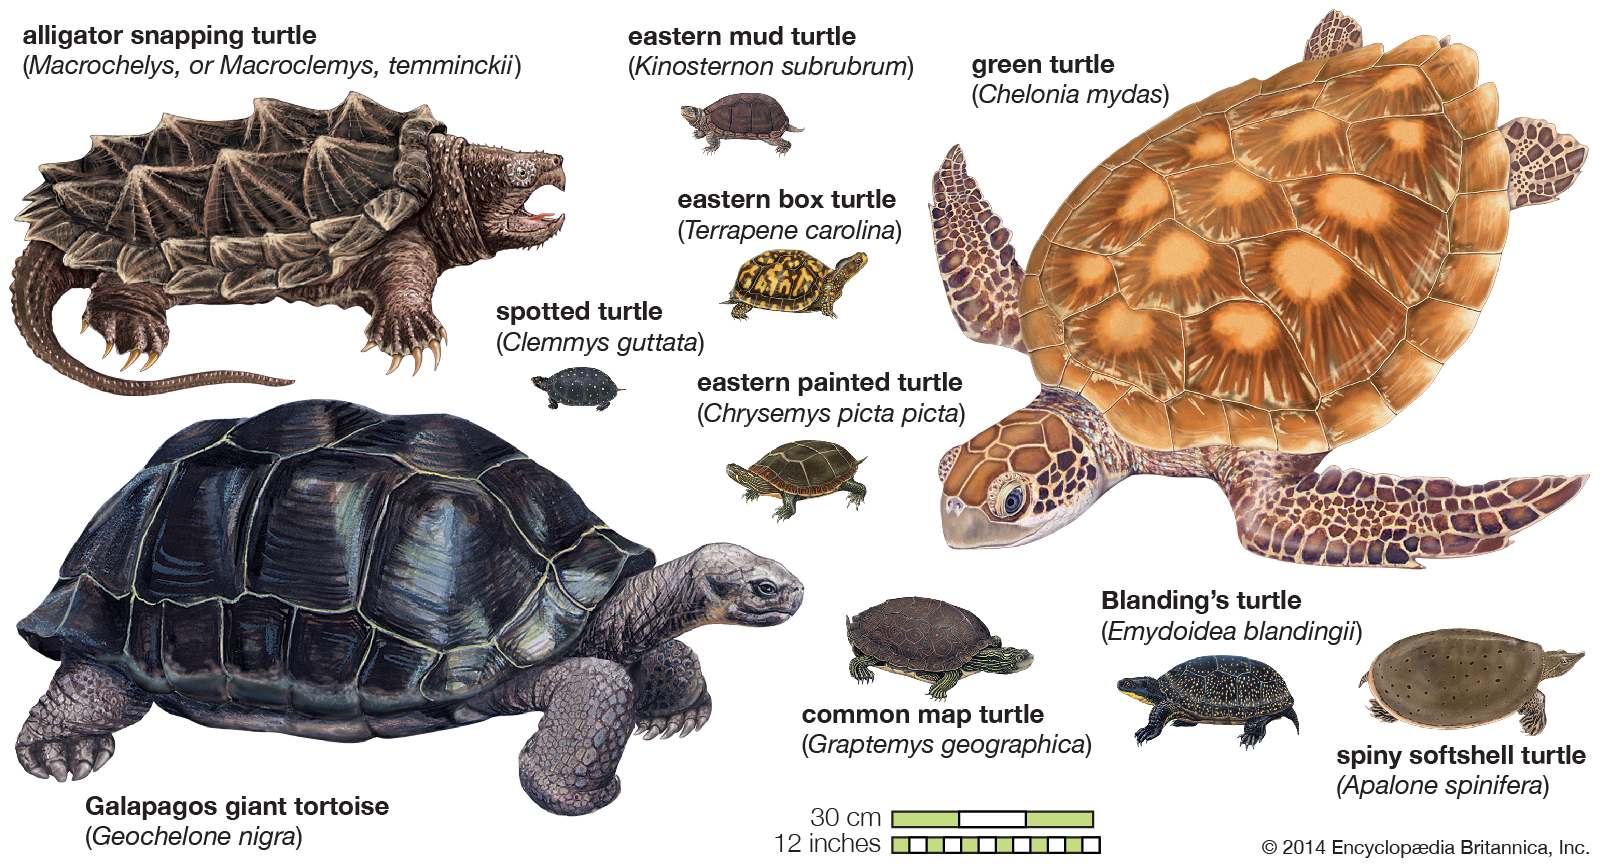 What is a turtles common name?